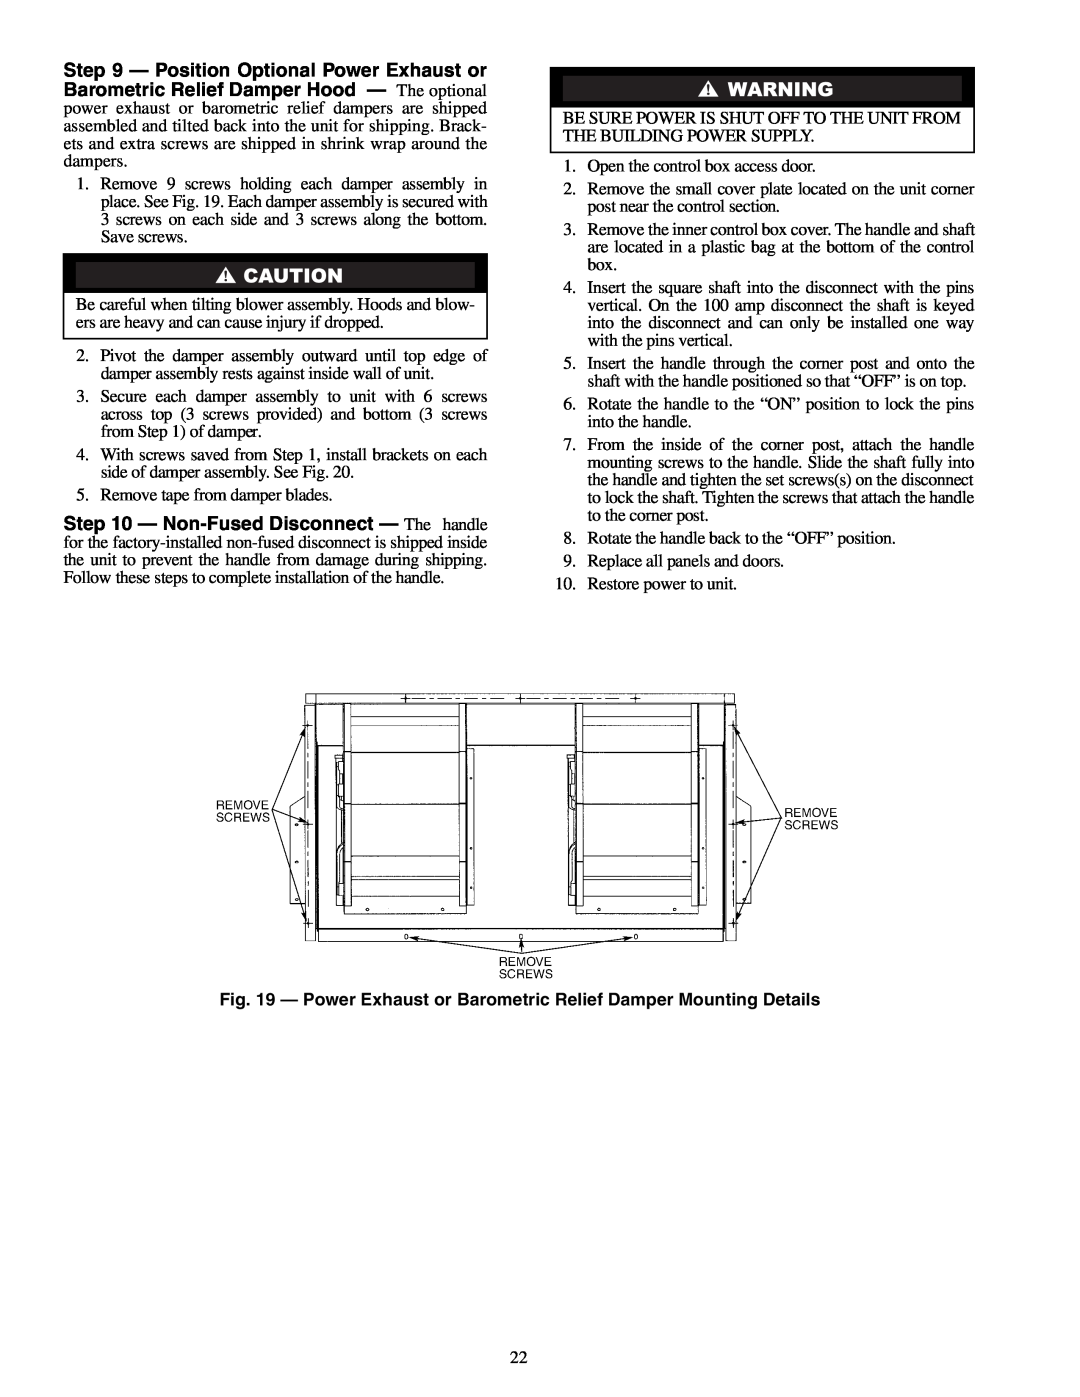 Carrier 50HG014-028 installation instructions Remove tape from damper blades 